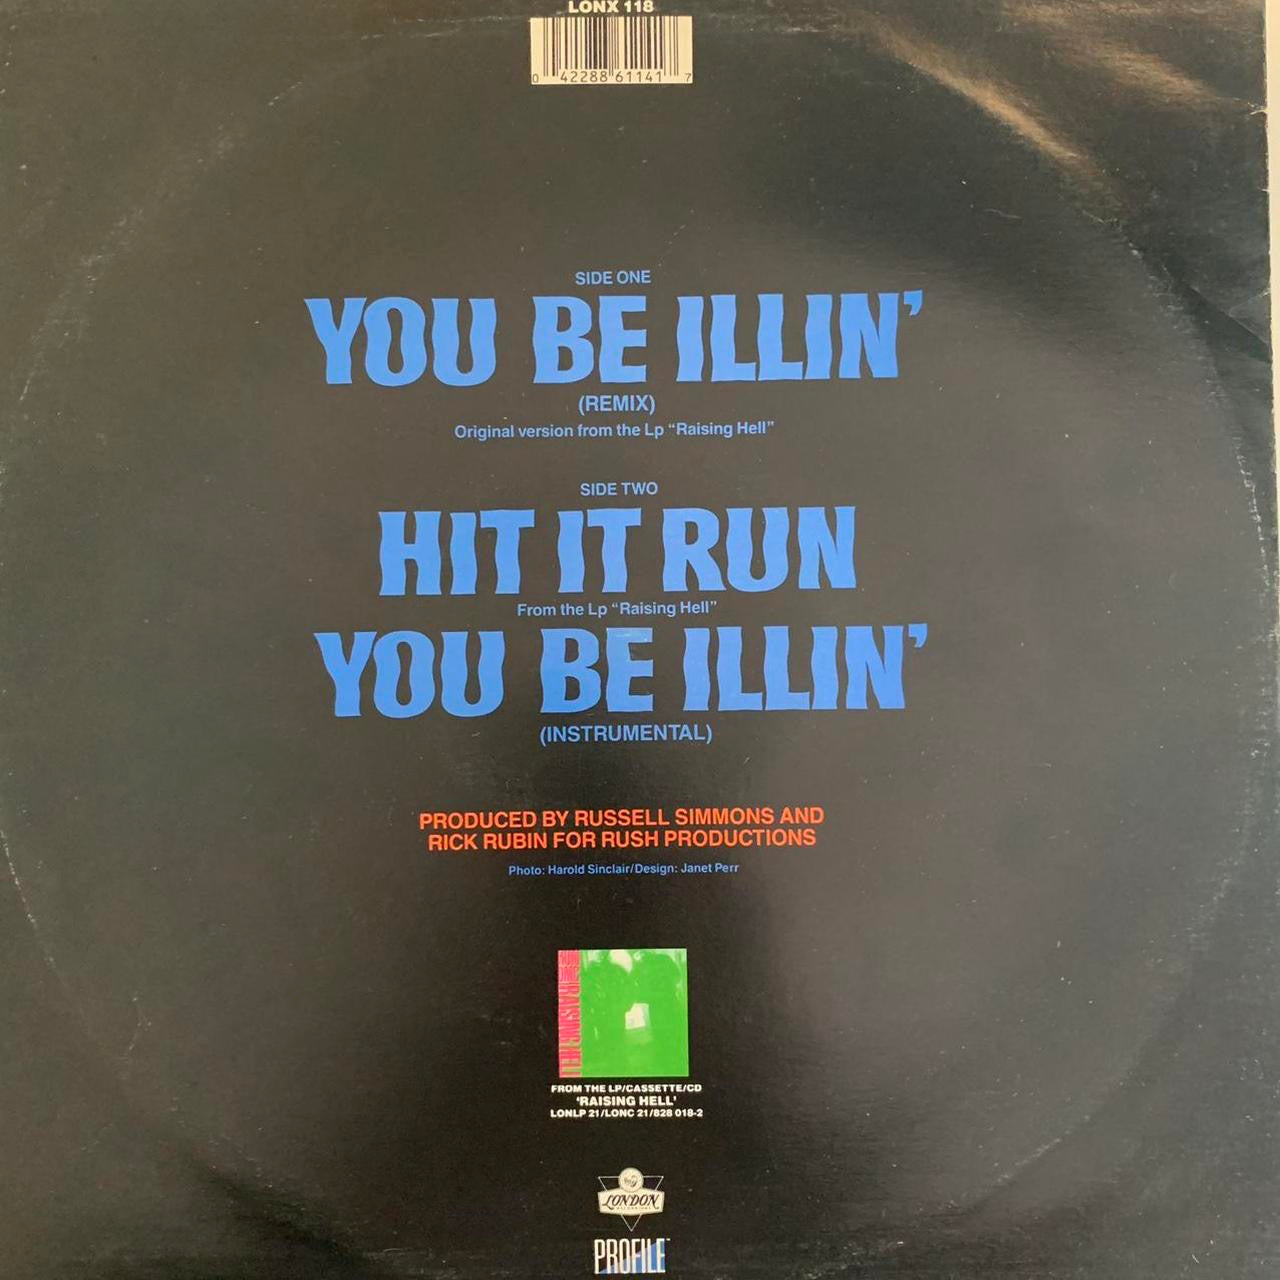 RUN DMC “You’ll Be illin” / “Hit It Run” 3 Track 12inch Vinyl Single Track Listing In Photos Featuring Remix and Instrumentals